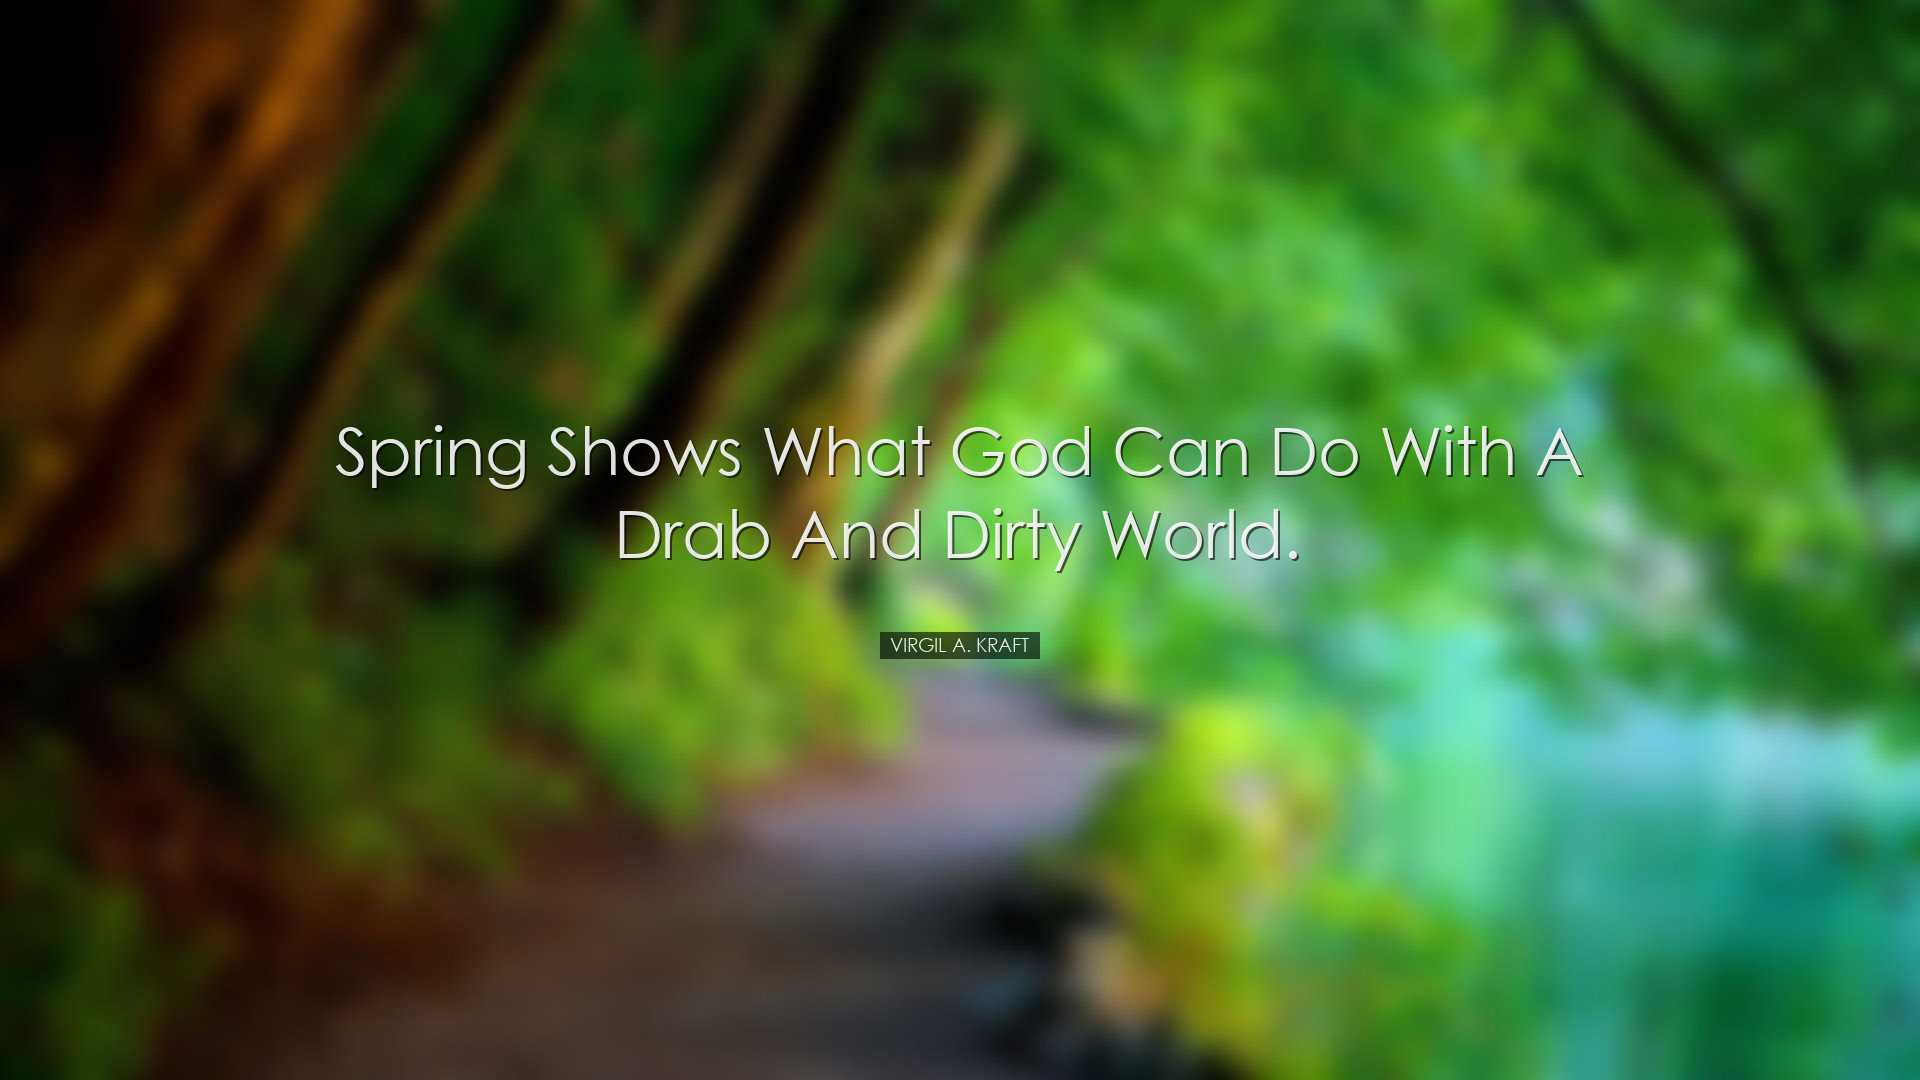 Spring shows what God can do with a drab and dirty world. - Virgil